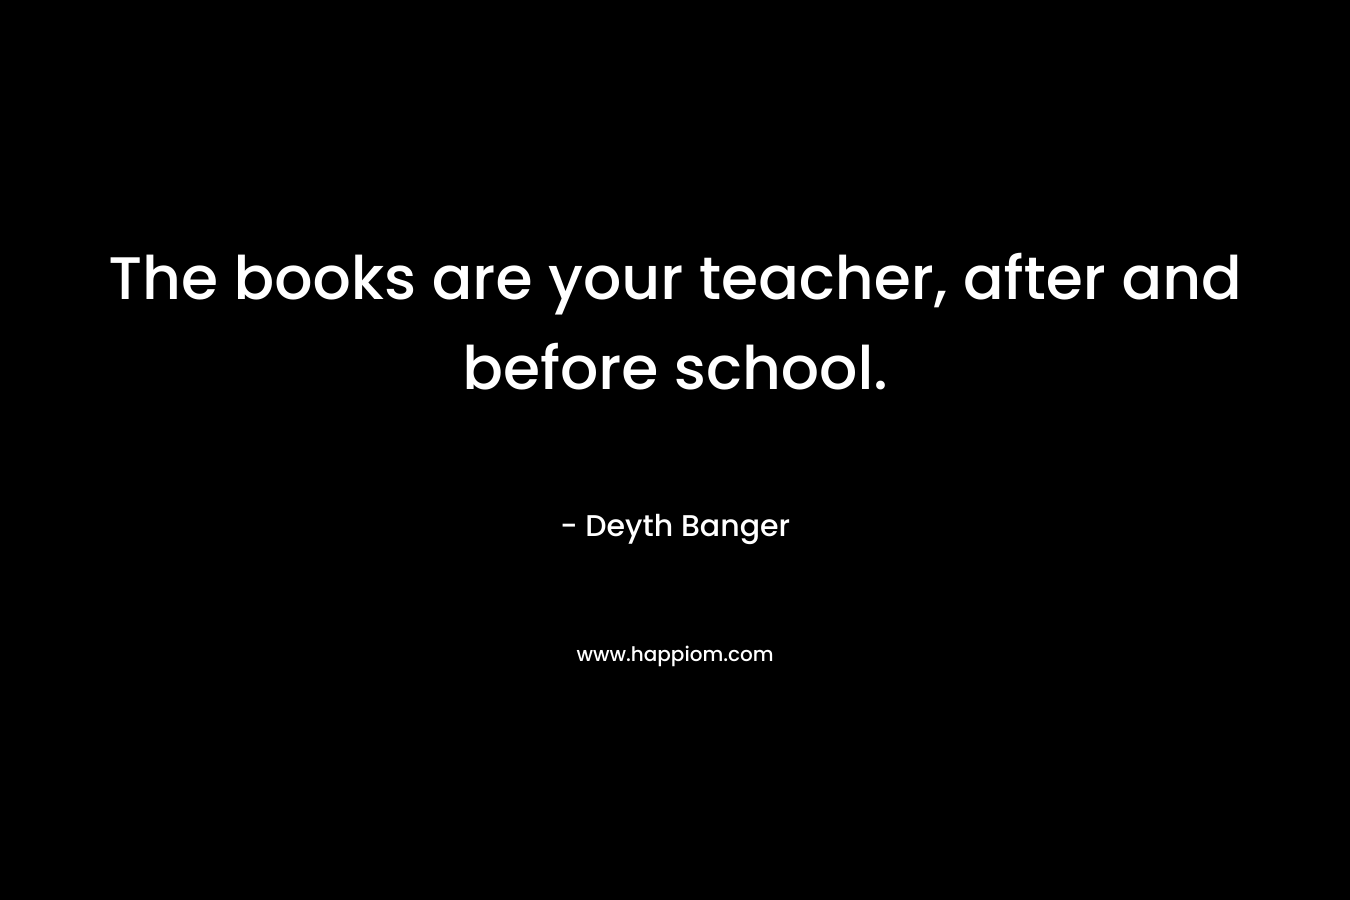 The books are your teacher, after and before school. – Deyth Banger